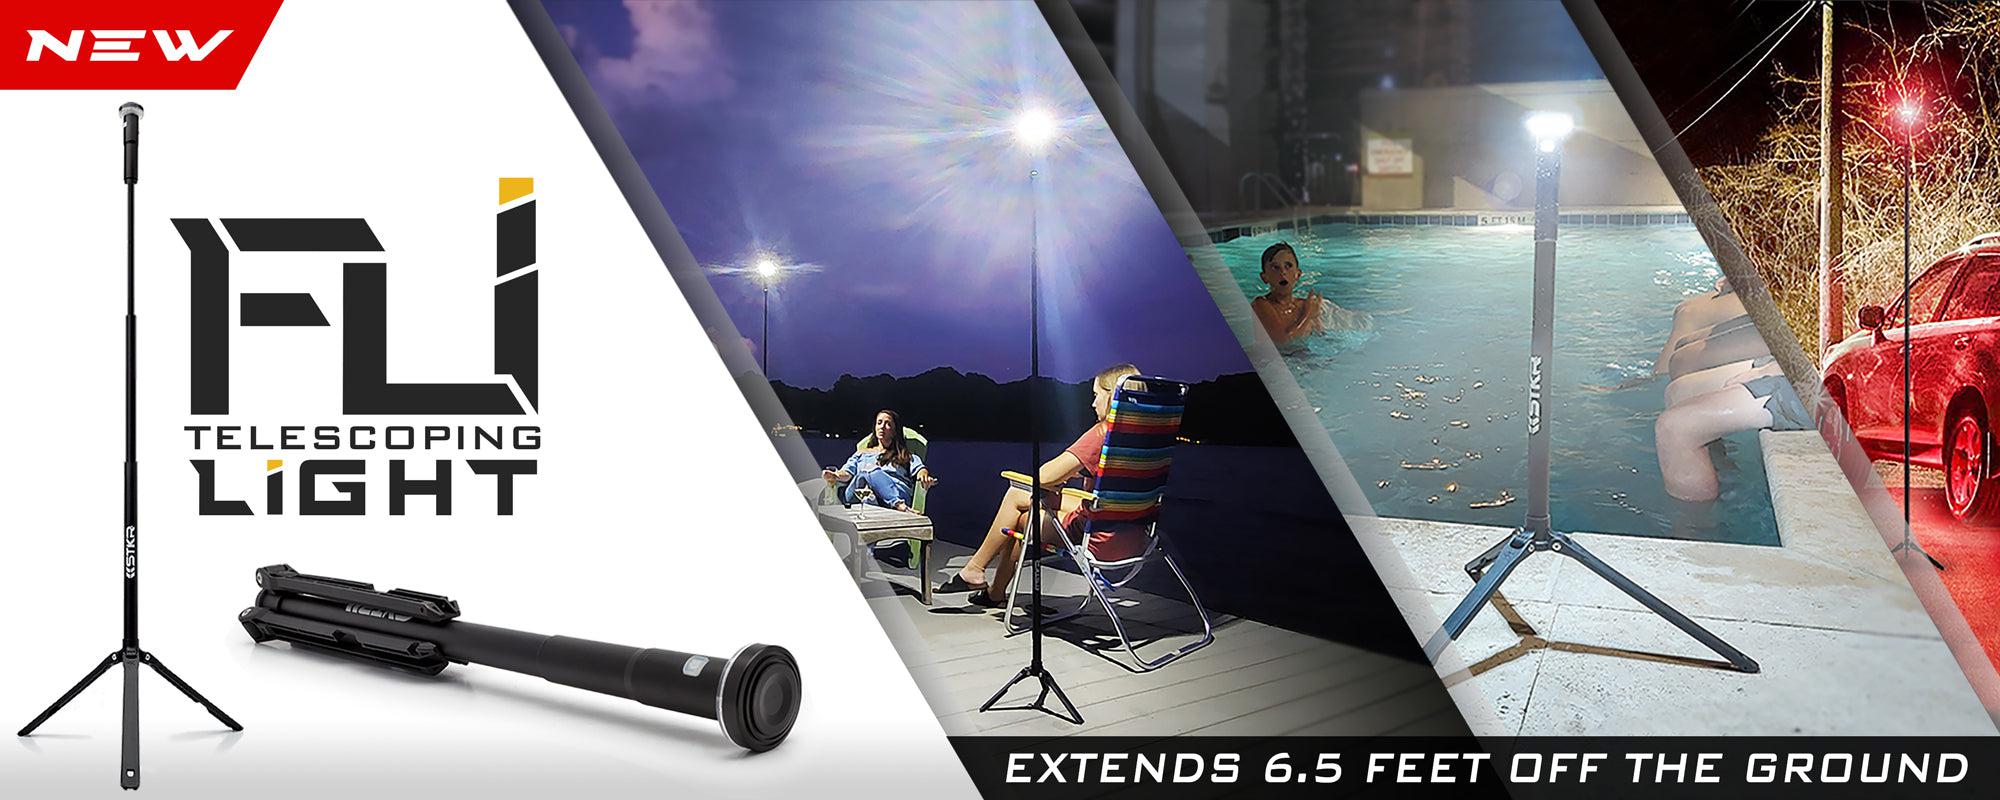 FLi Telescoping Light banner featuring lifestyle and studio product pics.